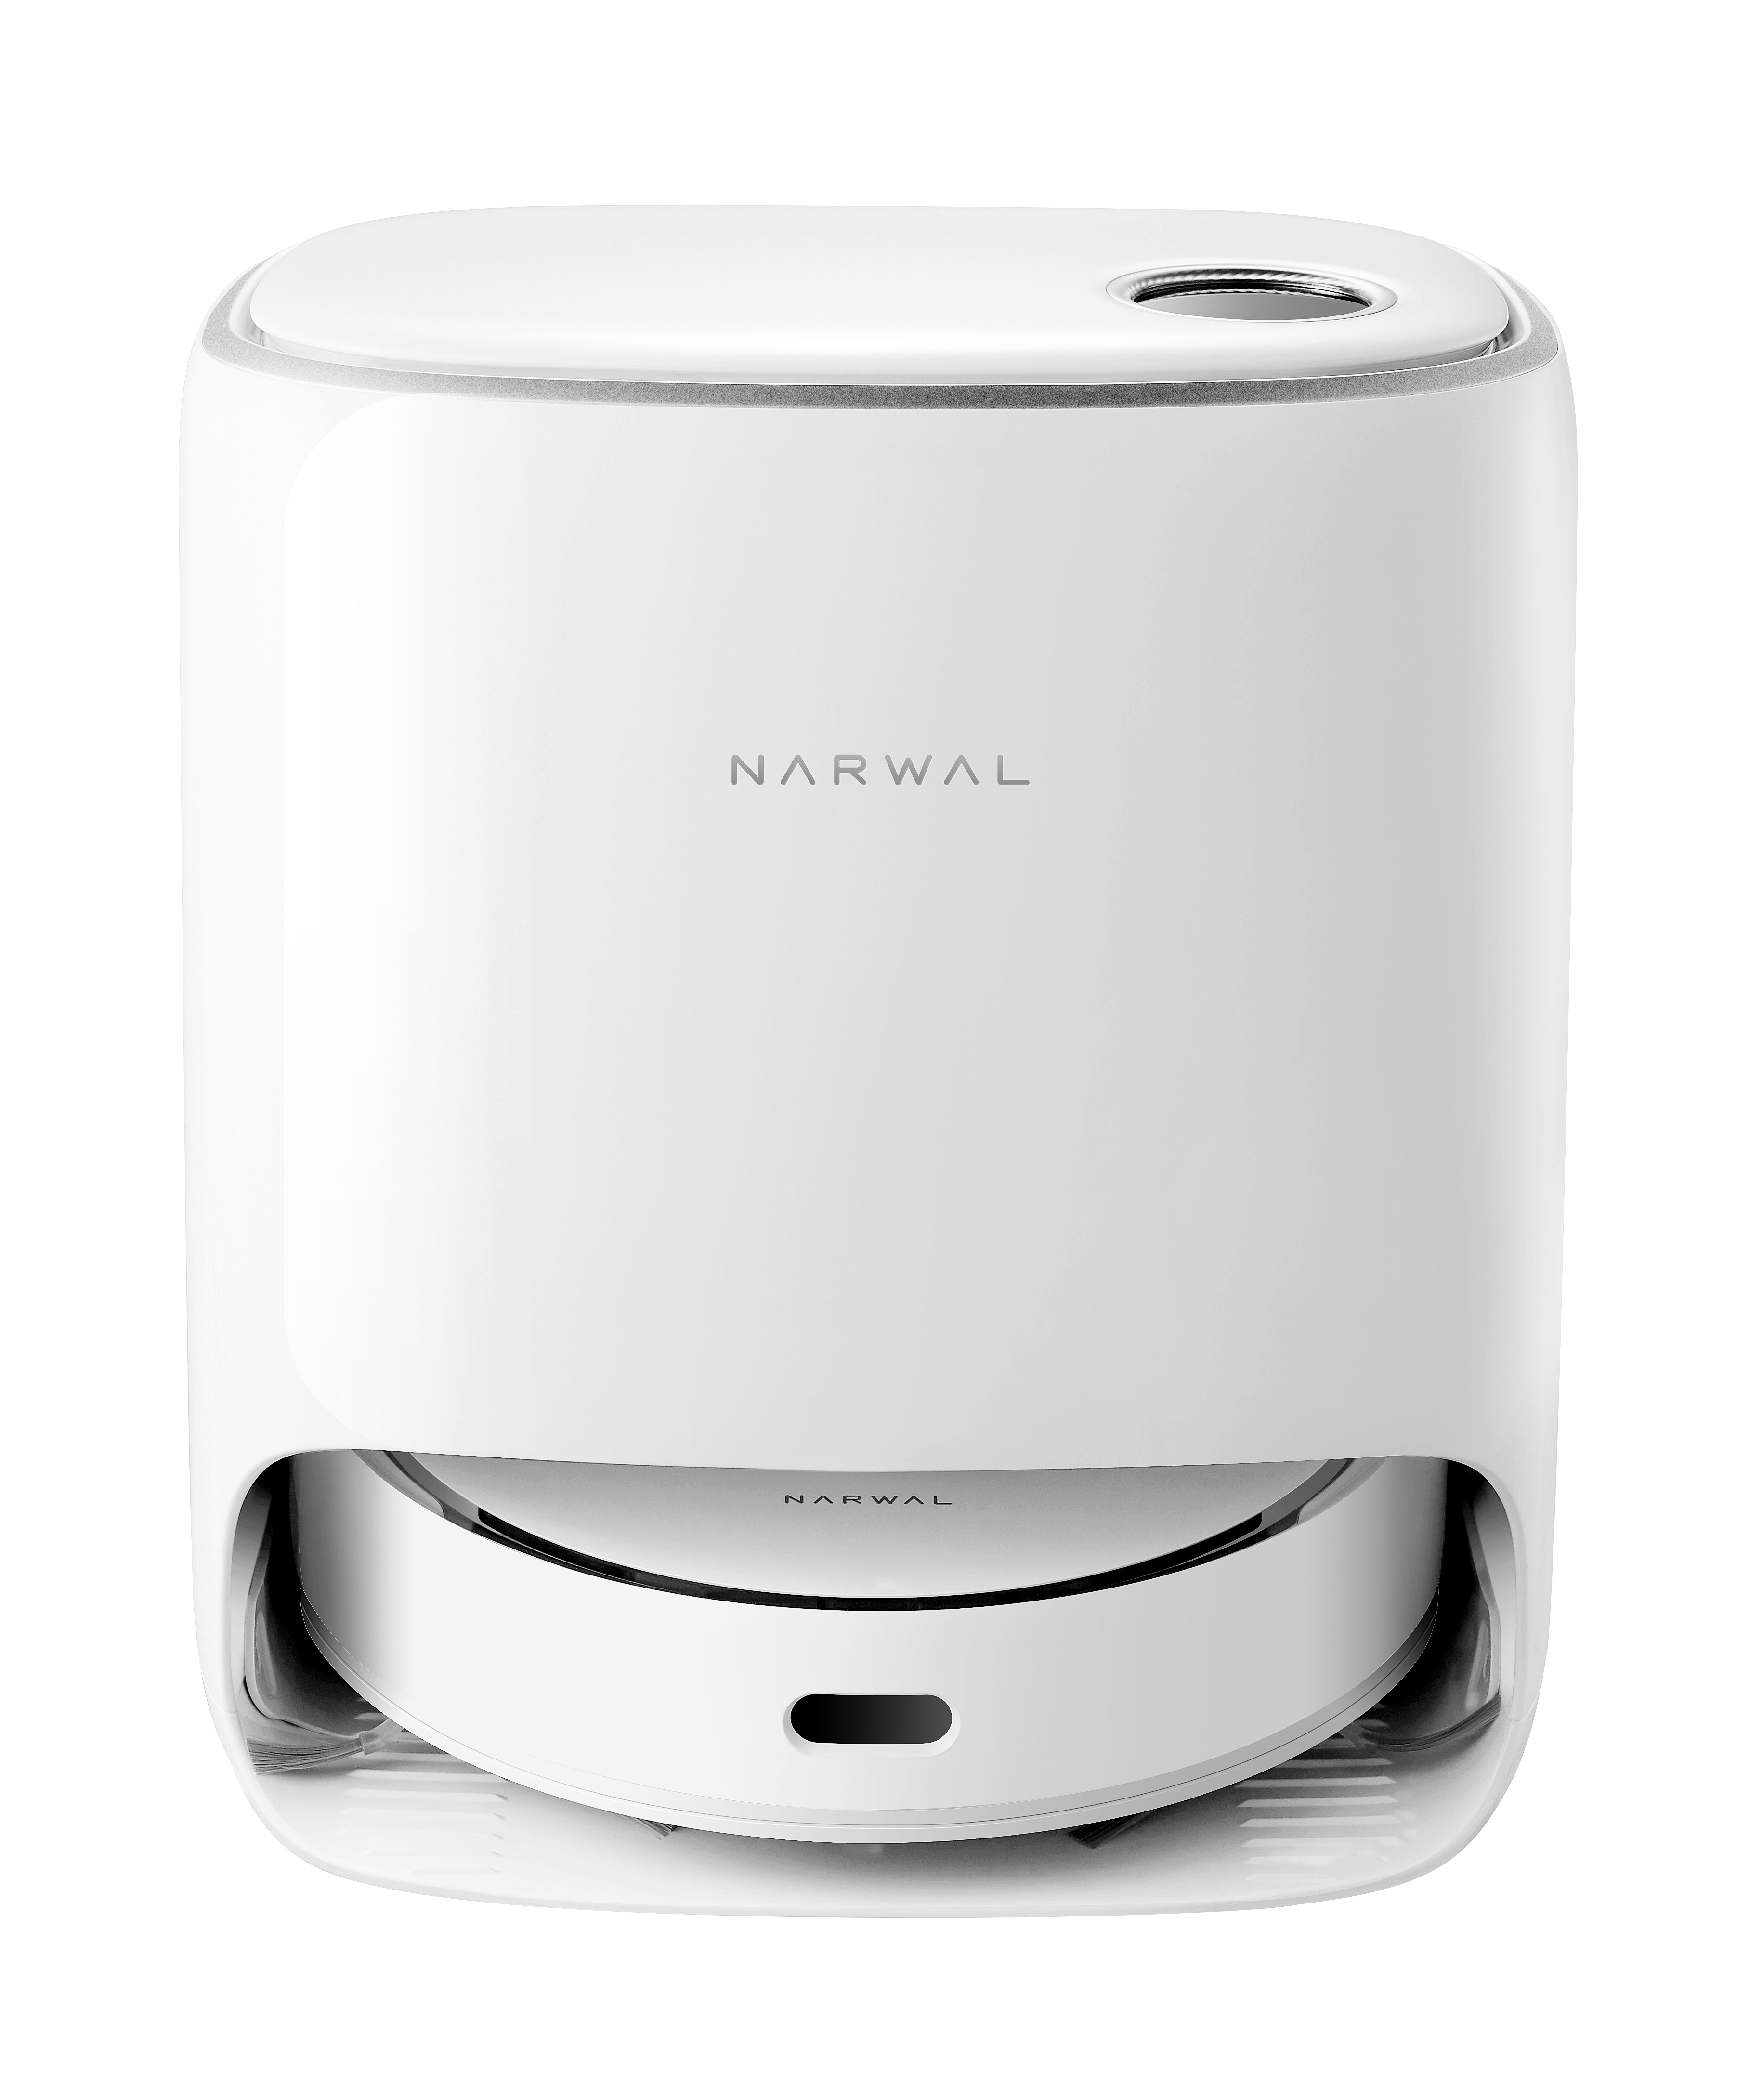 Robotic Vacuum Narwal Freo Makes Spring Cleaning a Breeze, for $200 Less!